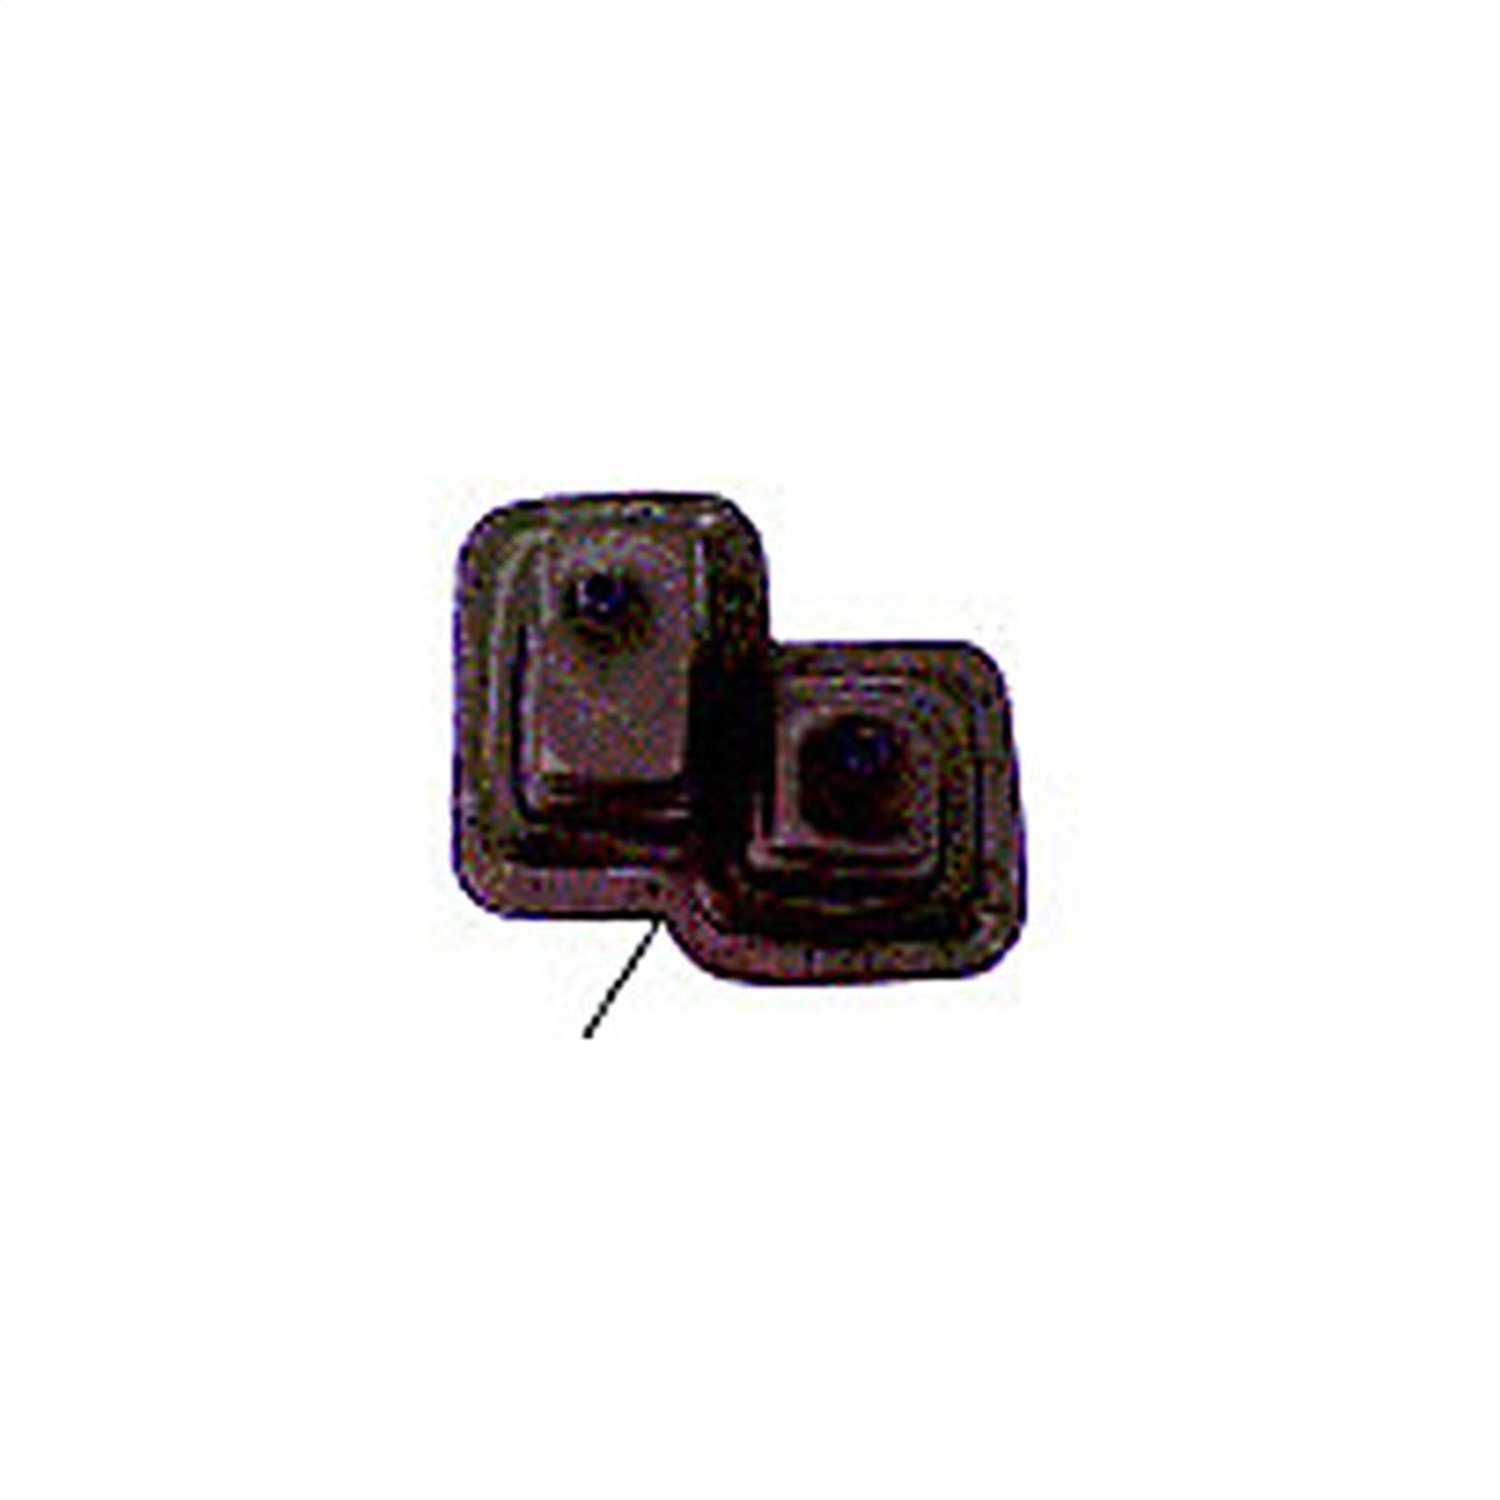 Replacement shifter boot from Omix-ADA, Fits Jeep CJ